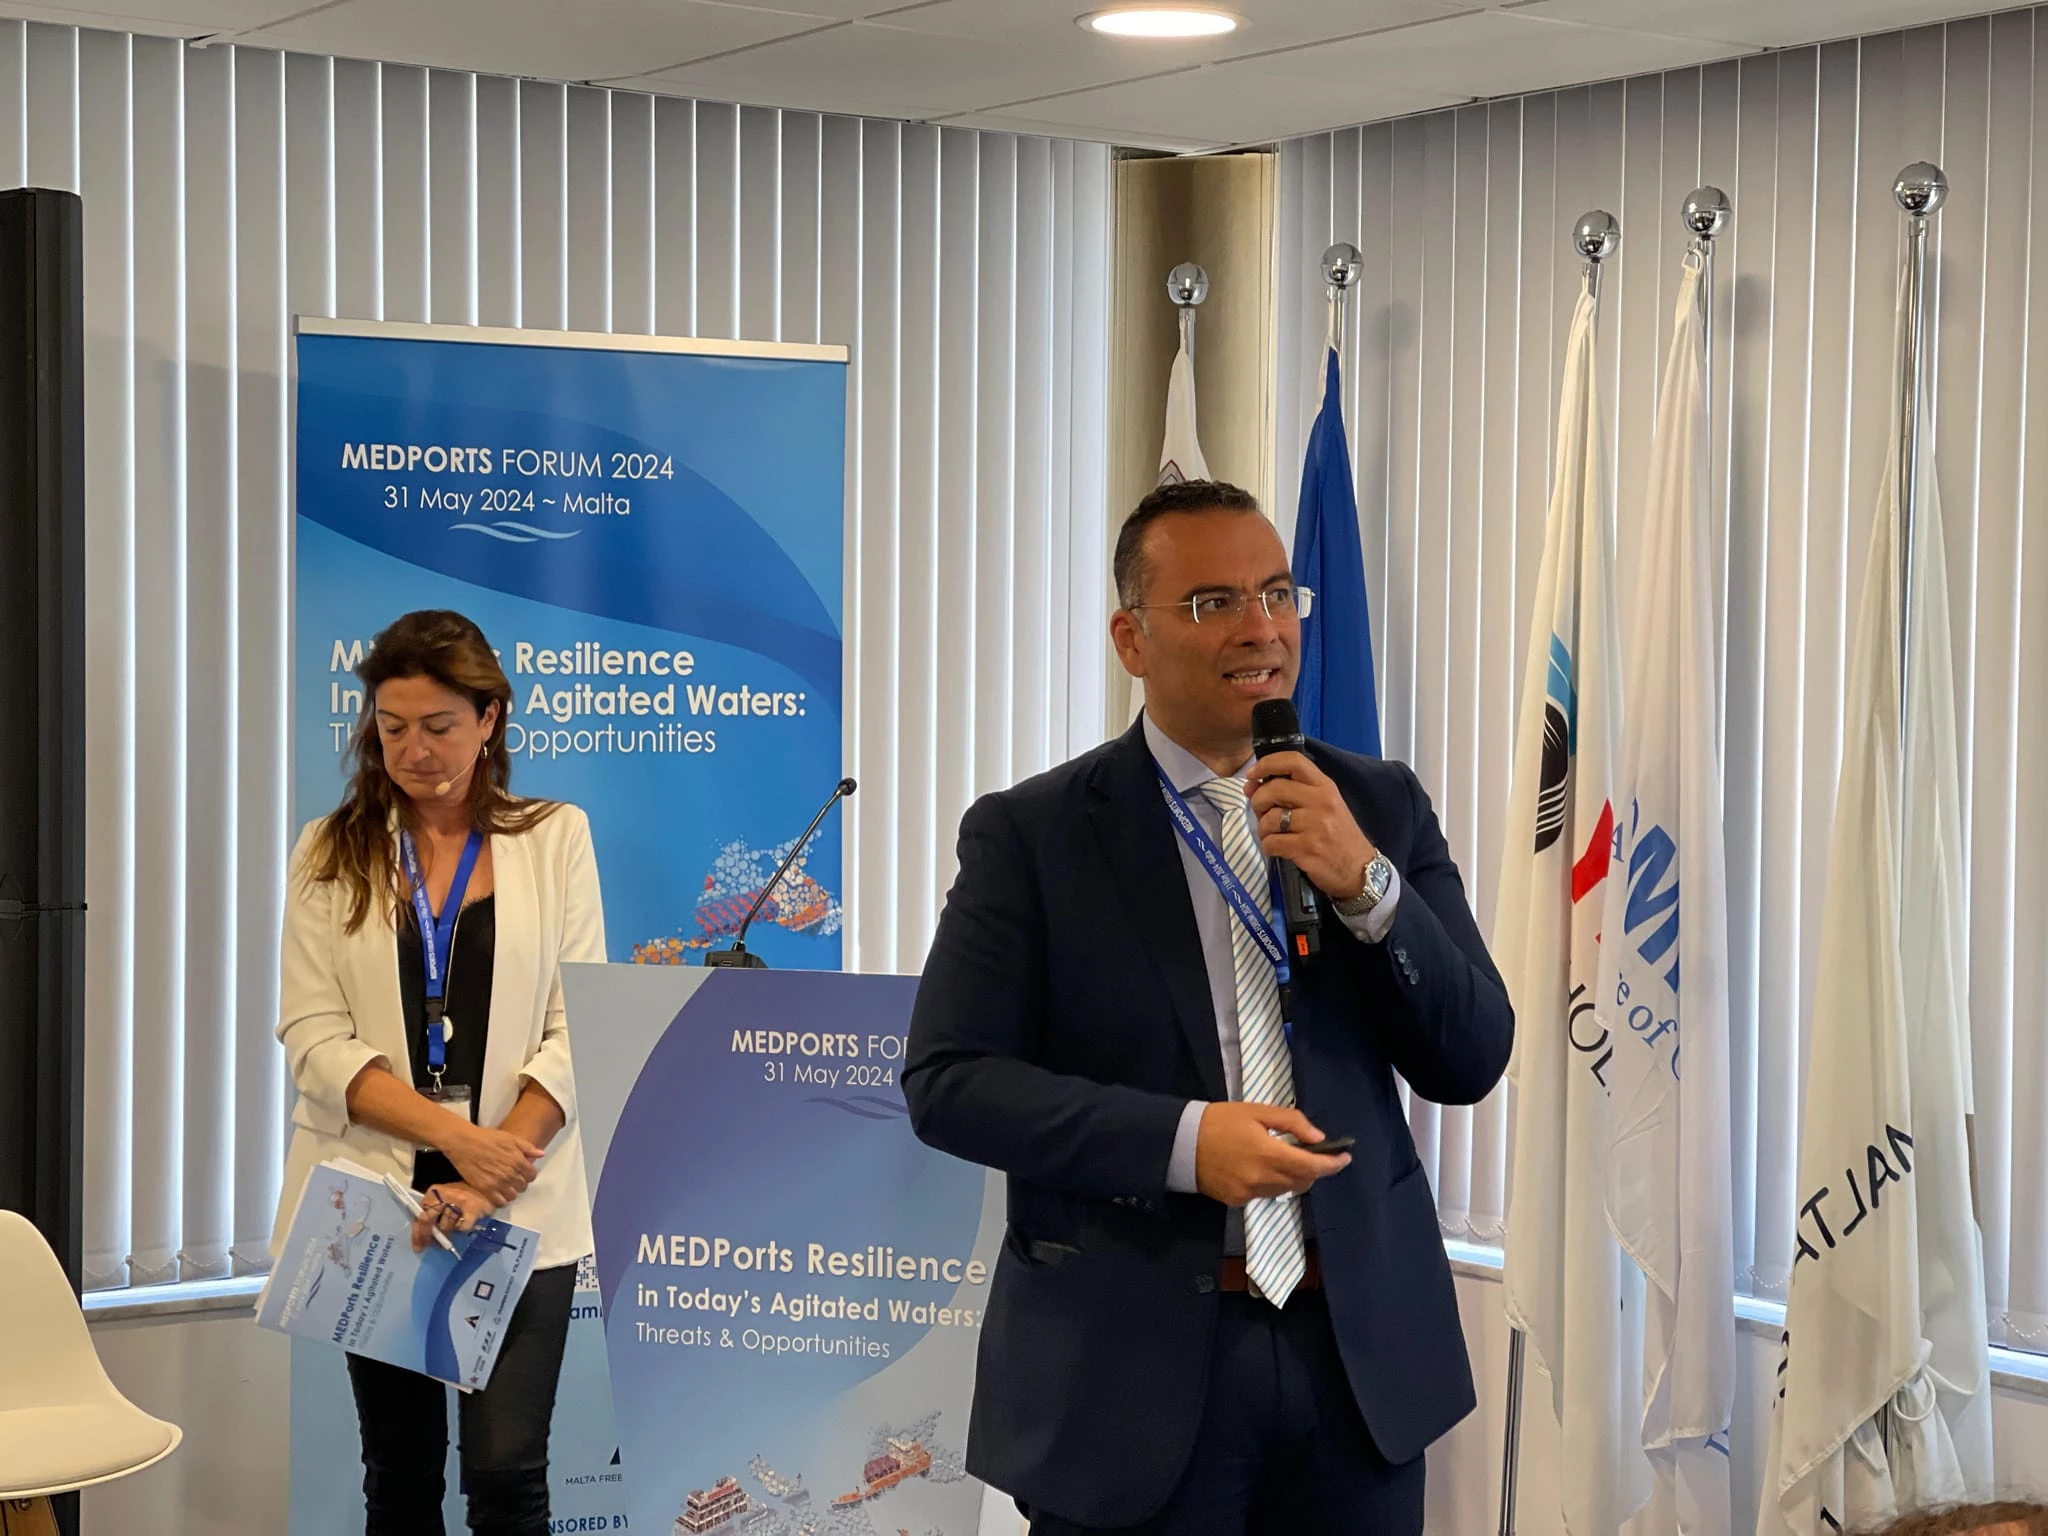 Participation of Prof. Alaa Mahmoud Morsy in the 2024 Annual Forum Organized by the MEDPORTS Association in Collaboration with the Port of Malta3